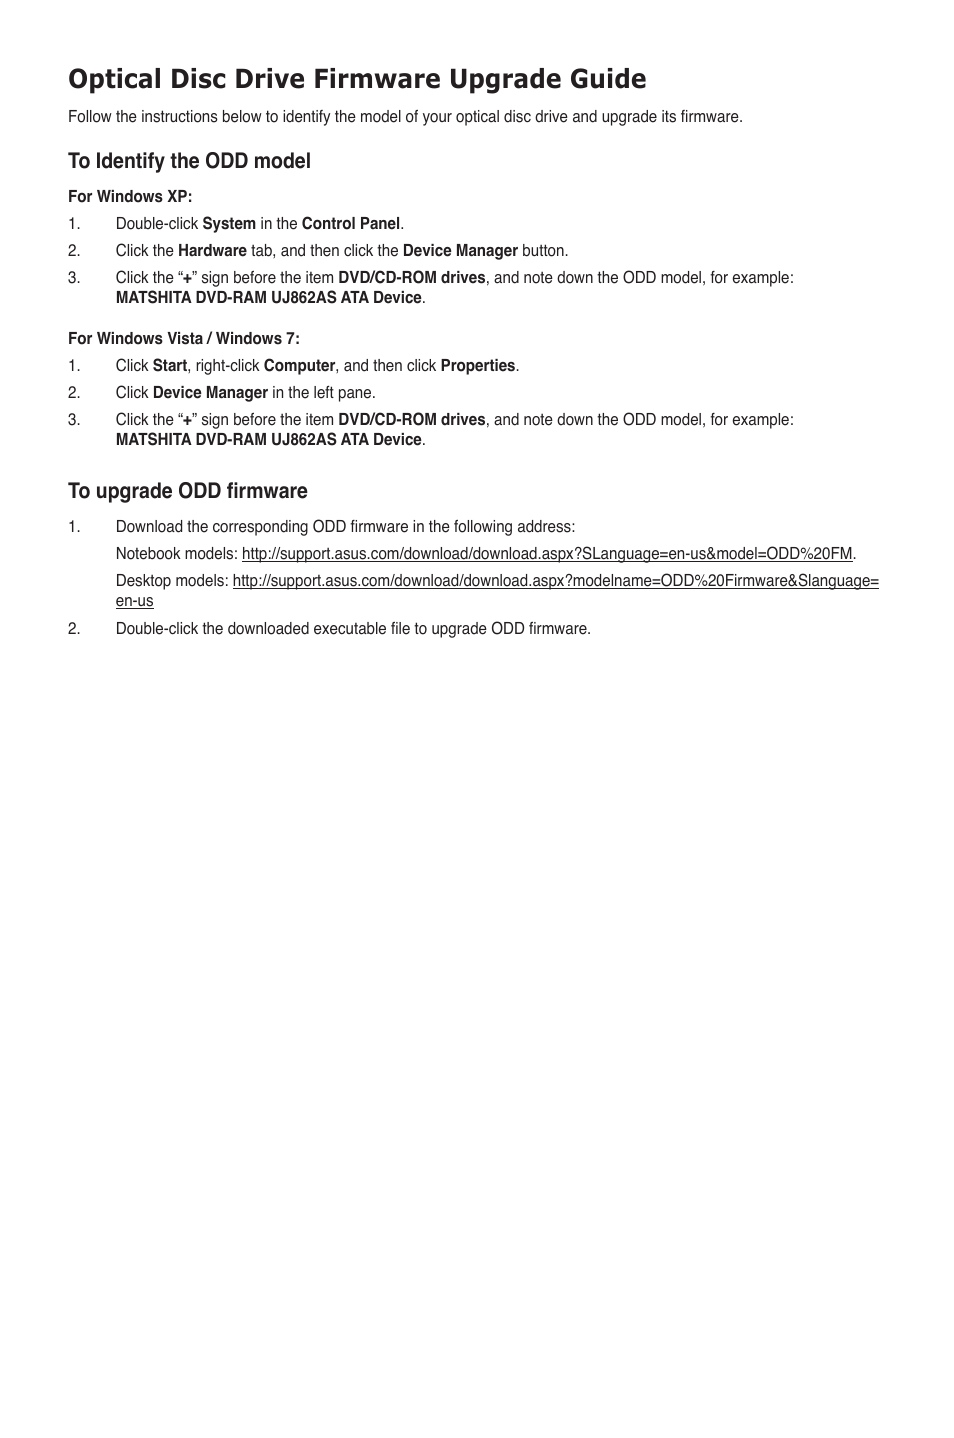 Optical Disk Drive Firmware (Page 1)